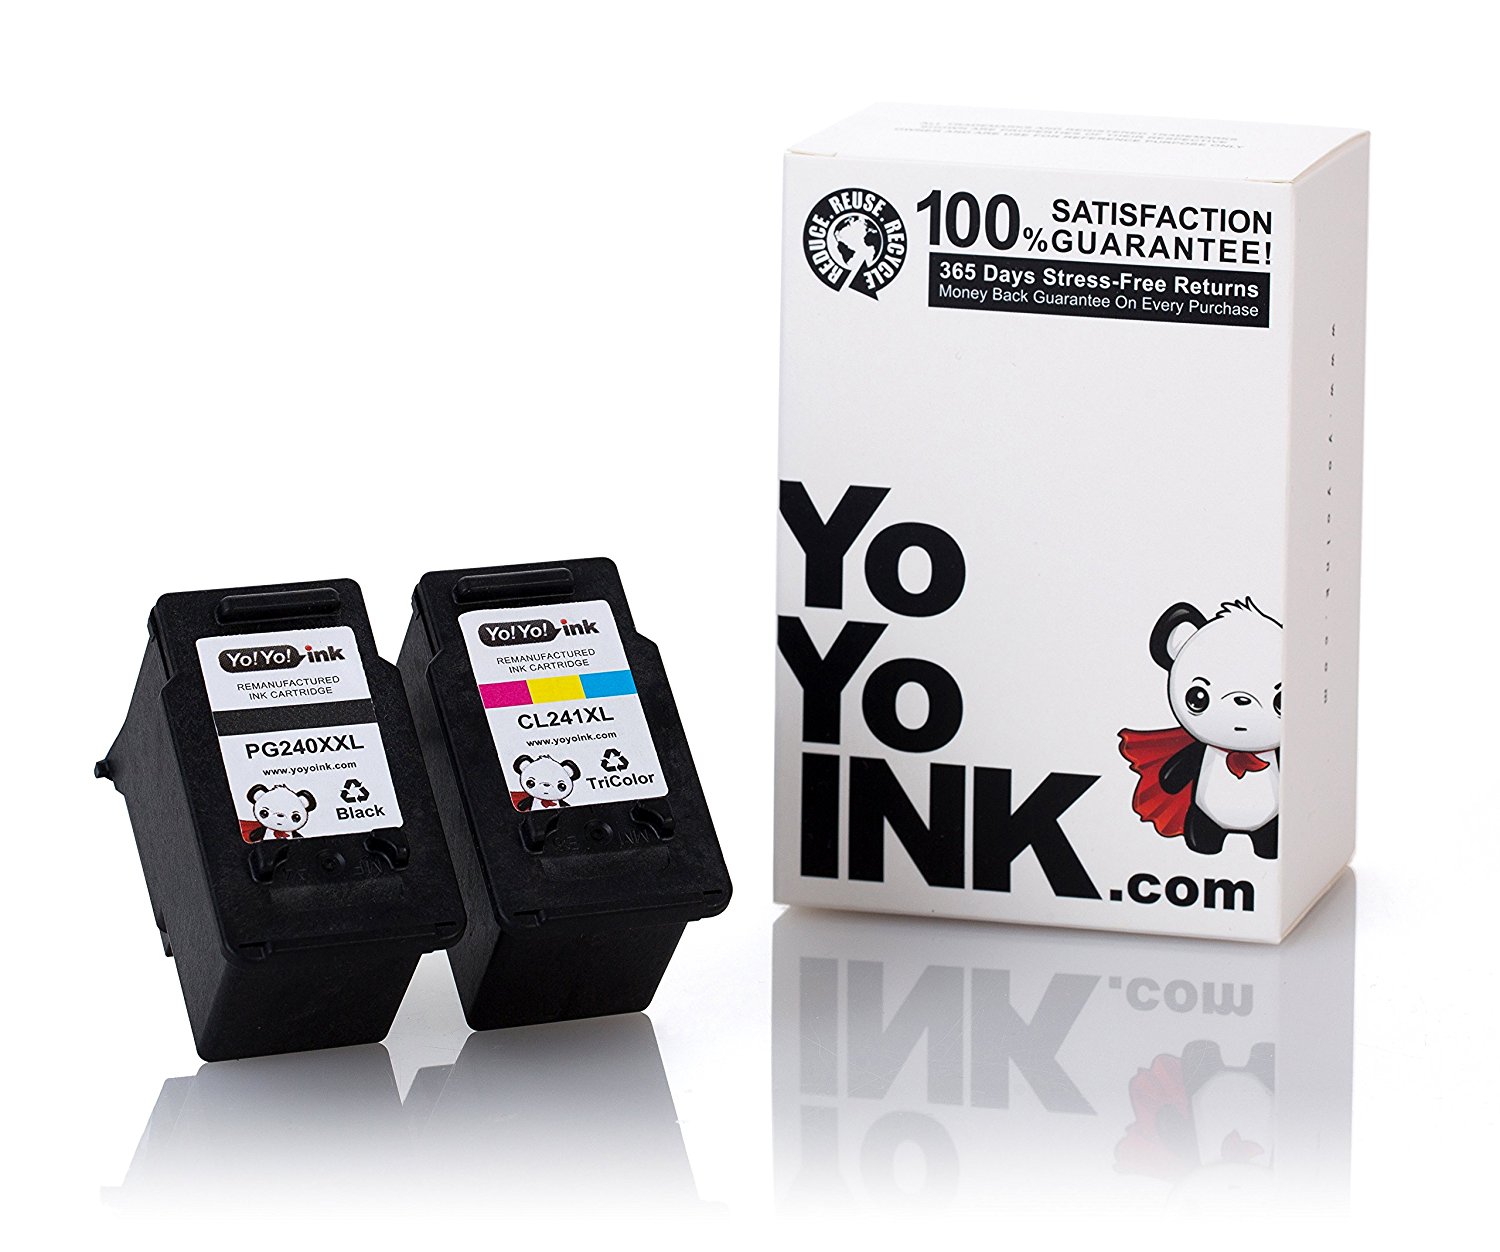 Canon Ink Cartridges 240 and 241 XL $47.90 60% OFF Price